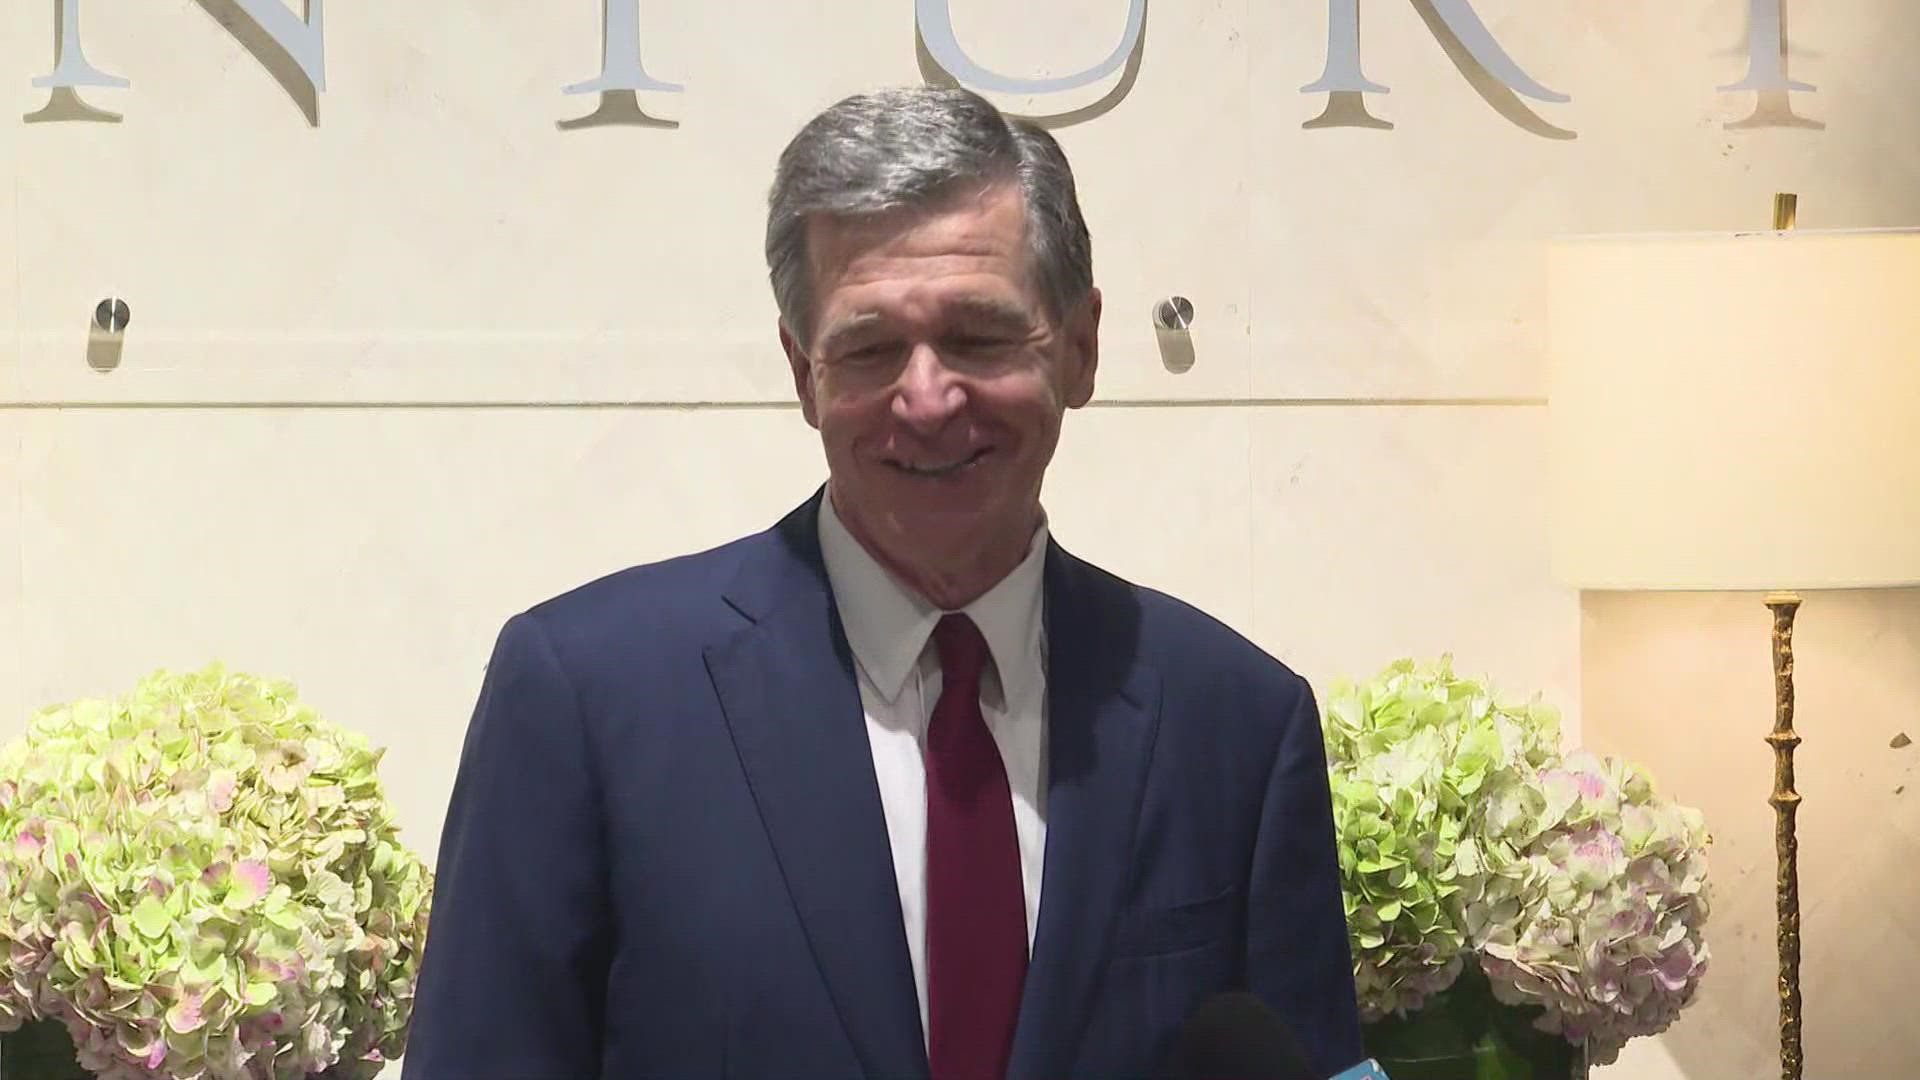 The governor said the event is a huge economic boost for High Point and also for North Carolina, and that there's "nothing else like it in the world."